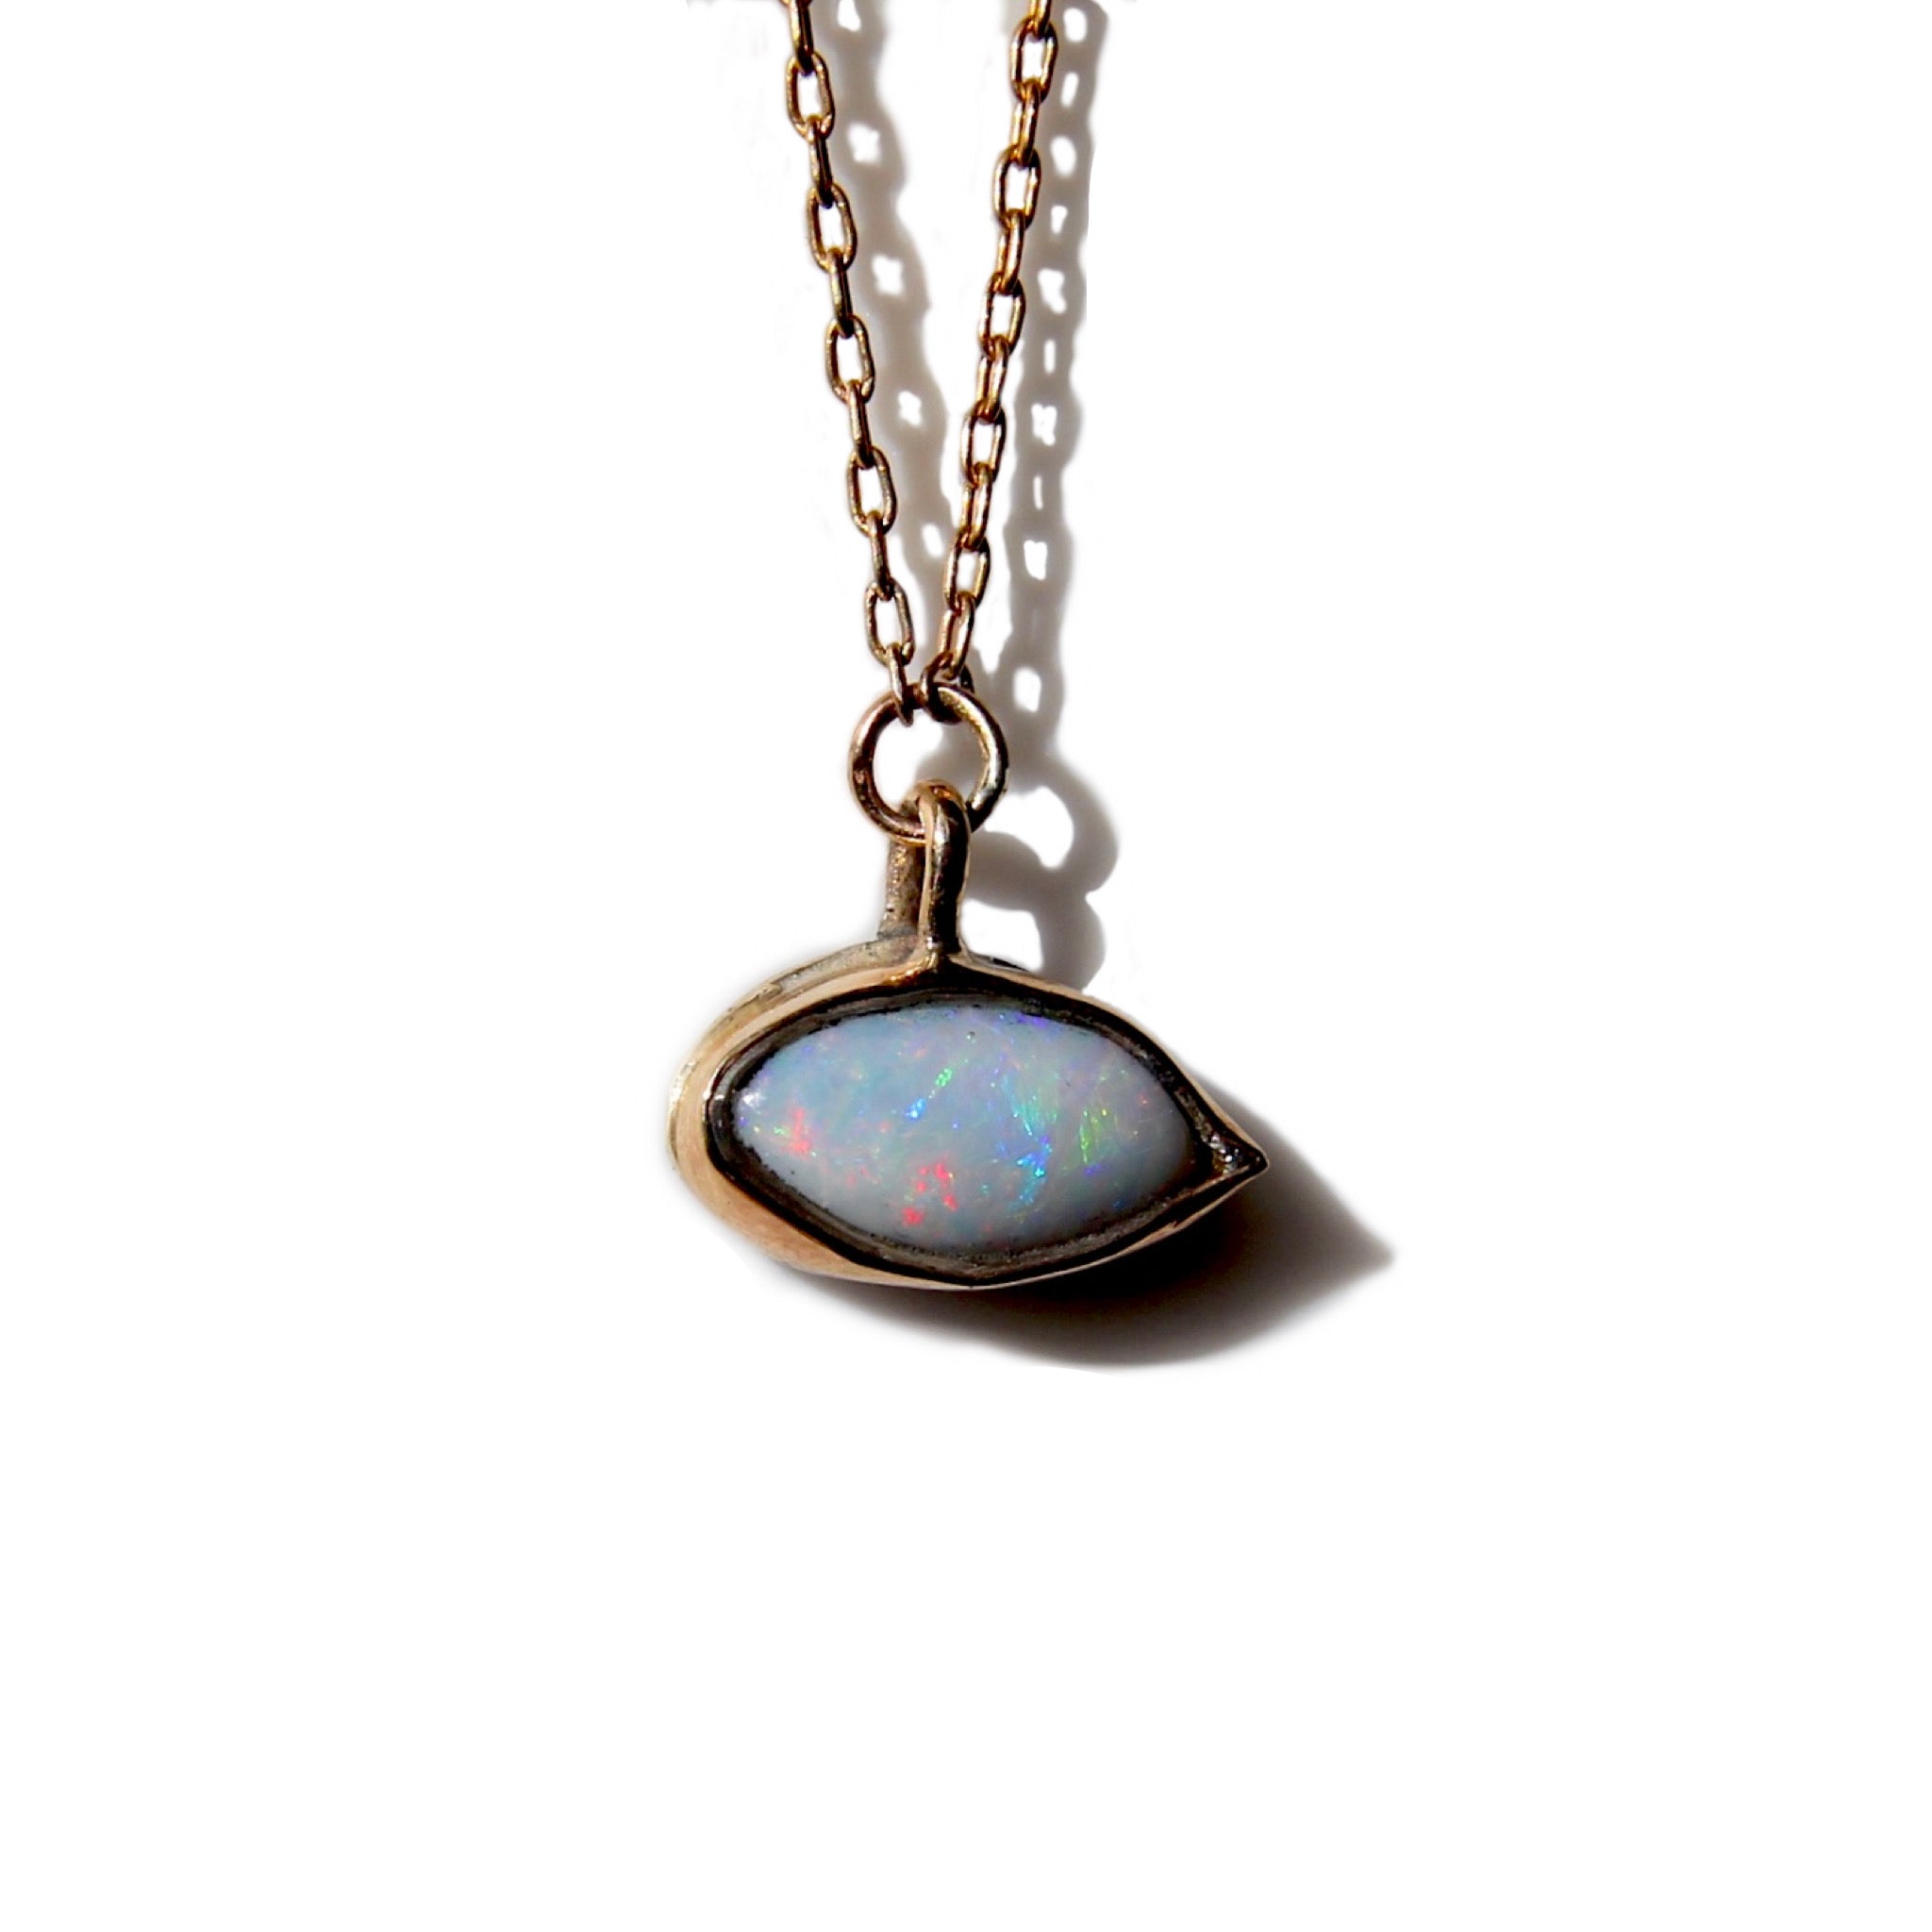 The Opal Eye Necklace